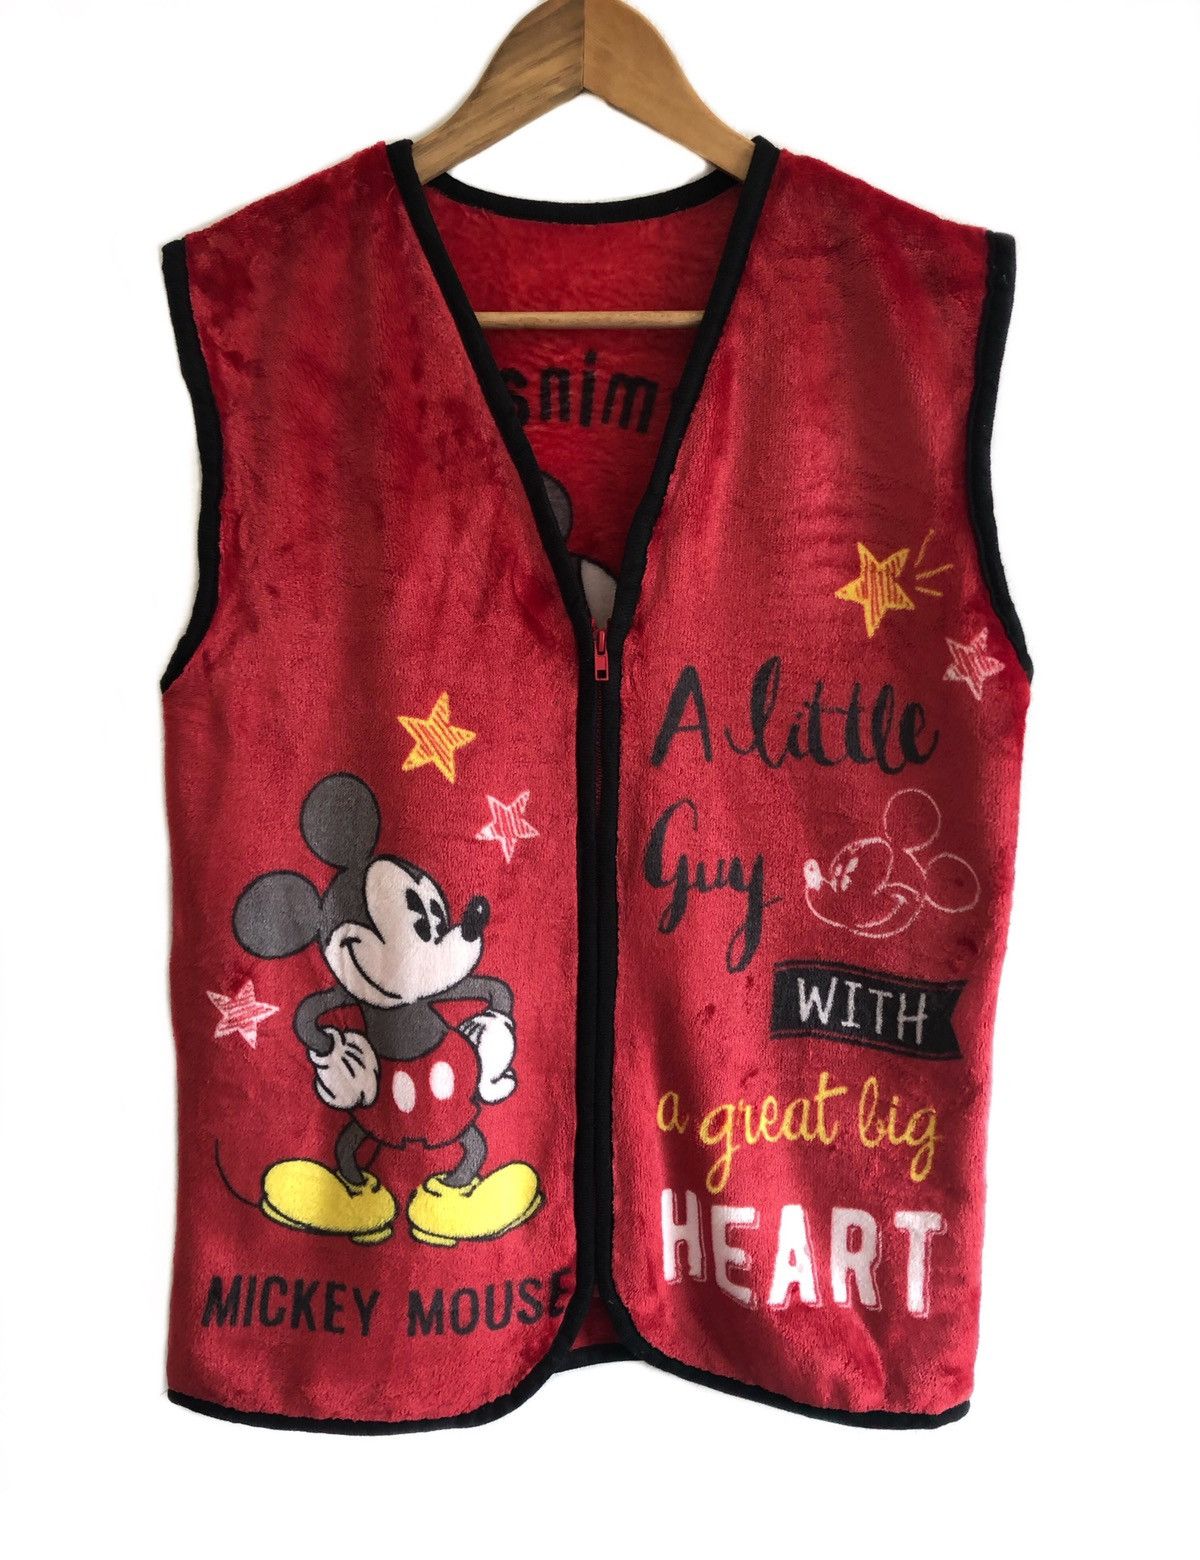 Vintage 80s Mickey Mouse cardigan vests - 2